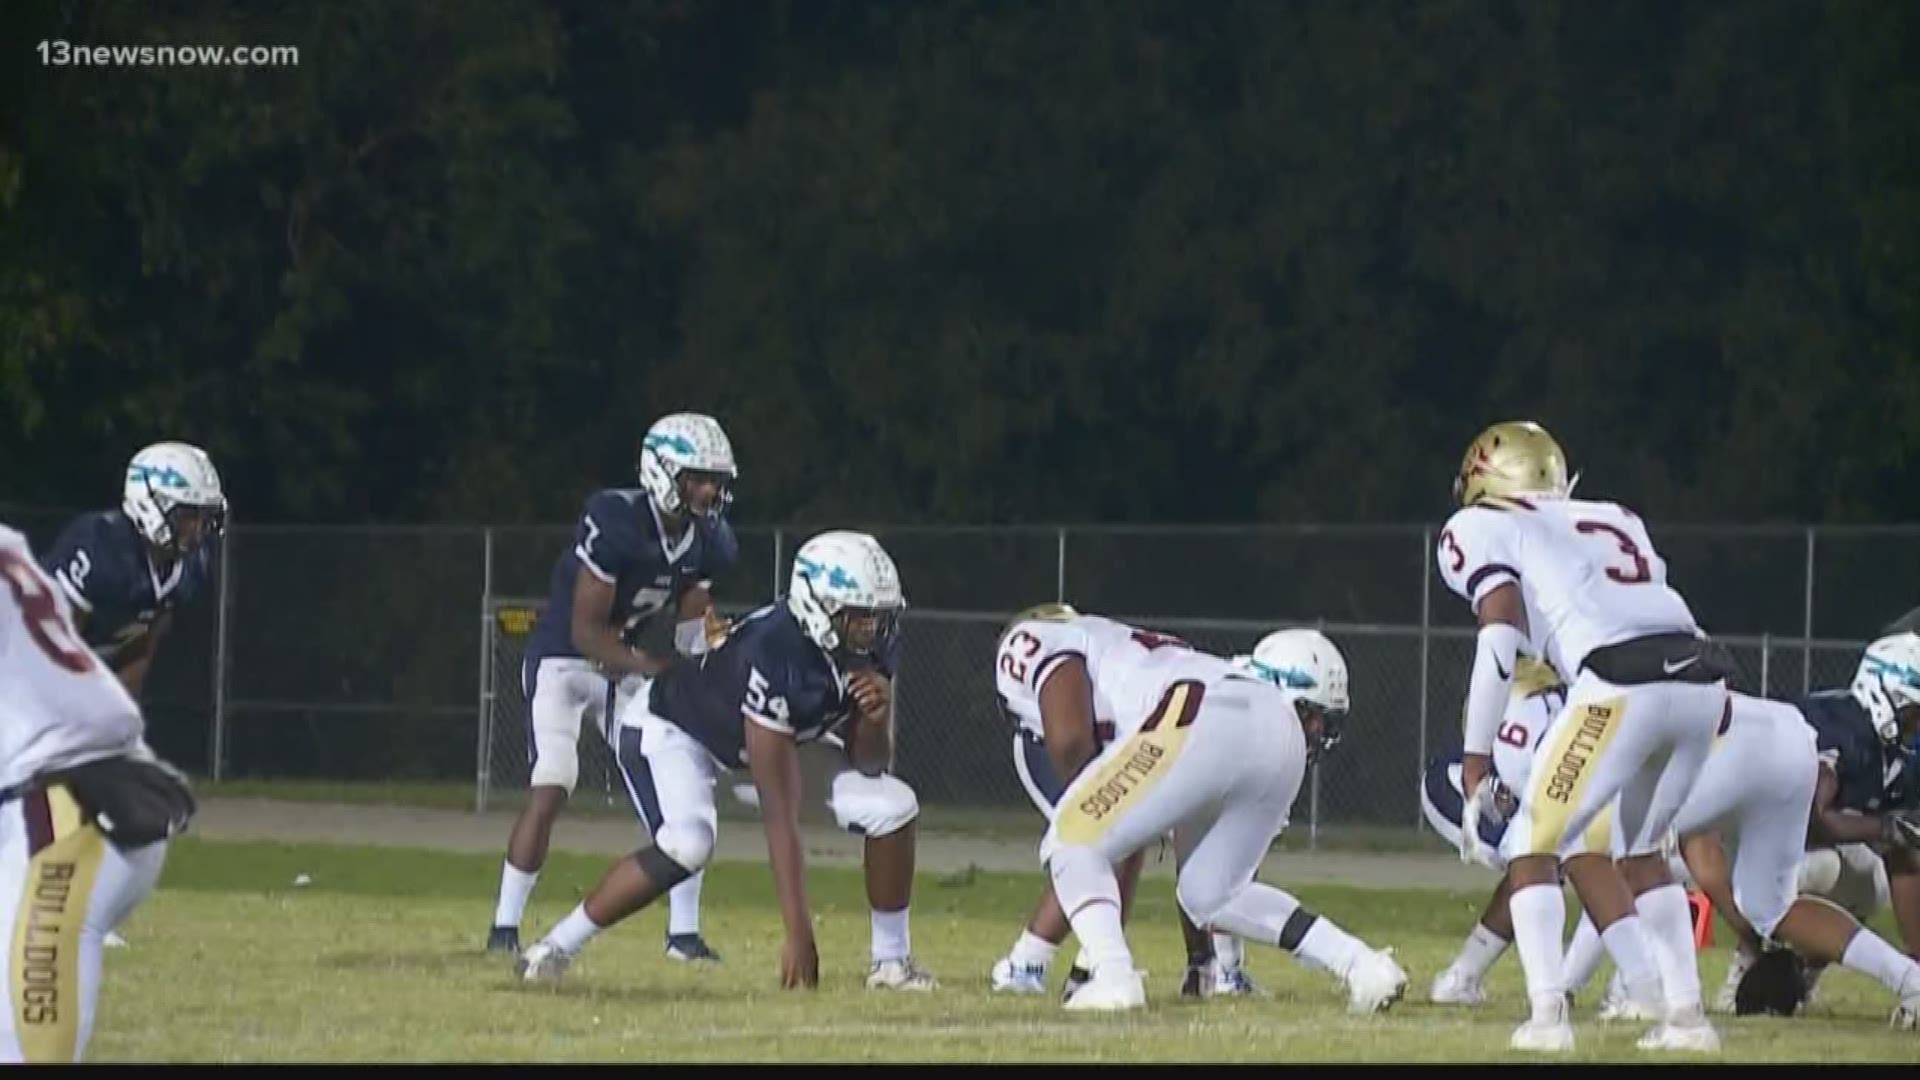 Despite several cancellations around the area, high school football still had some key matchups Friday night. It included Indian River rolling past King's Fork 41-13.